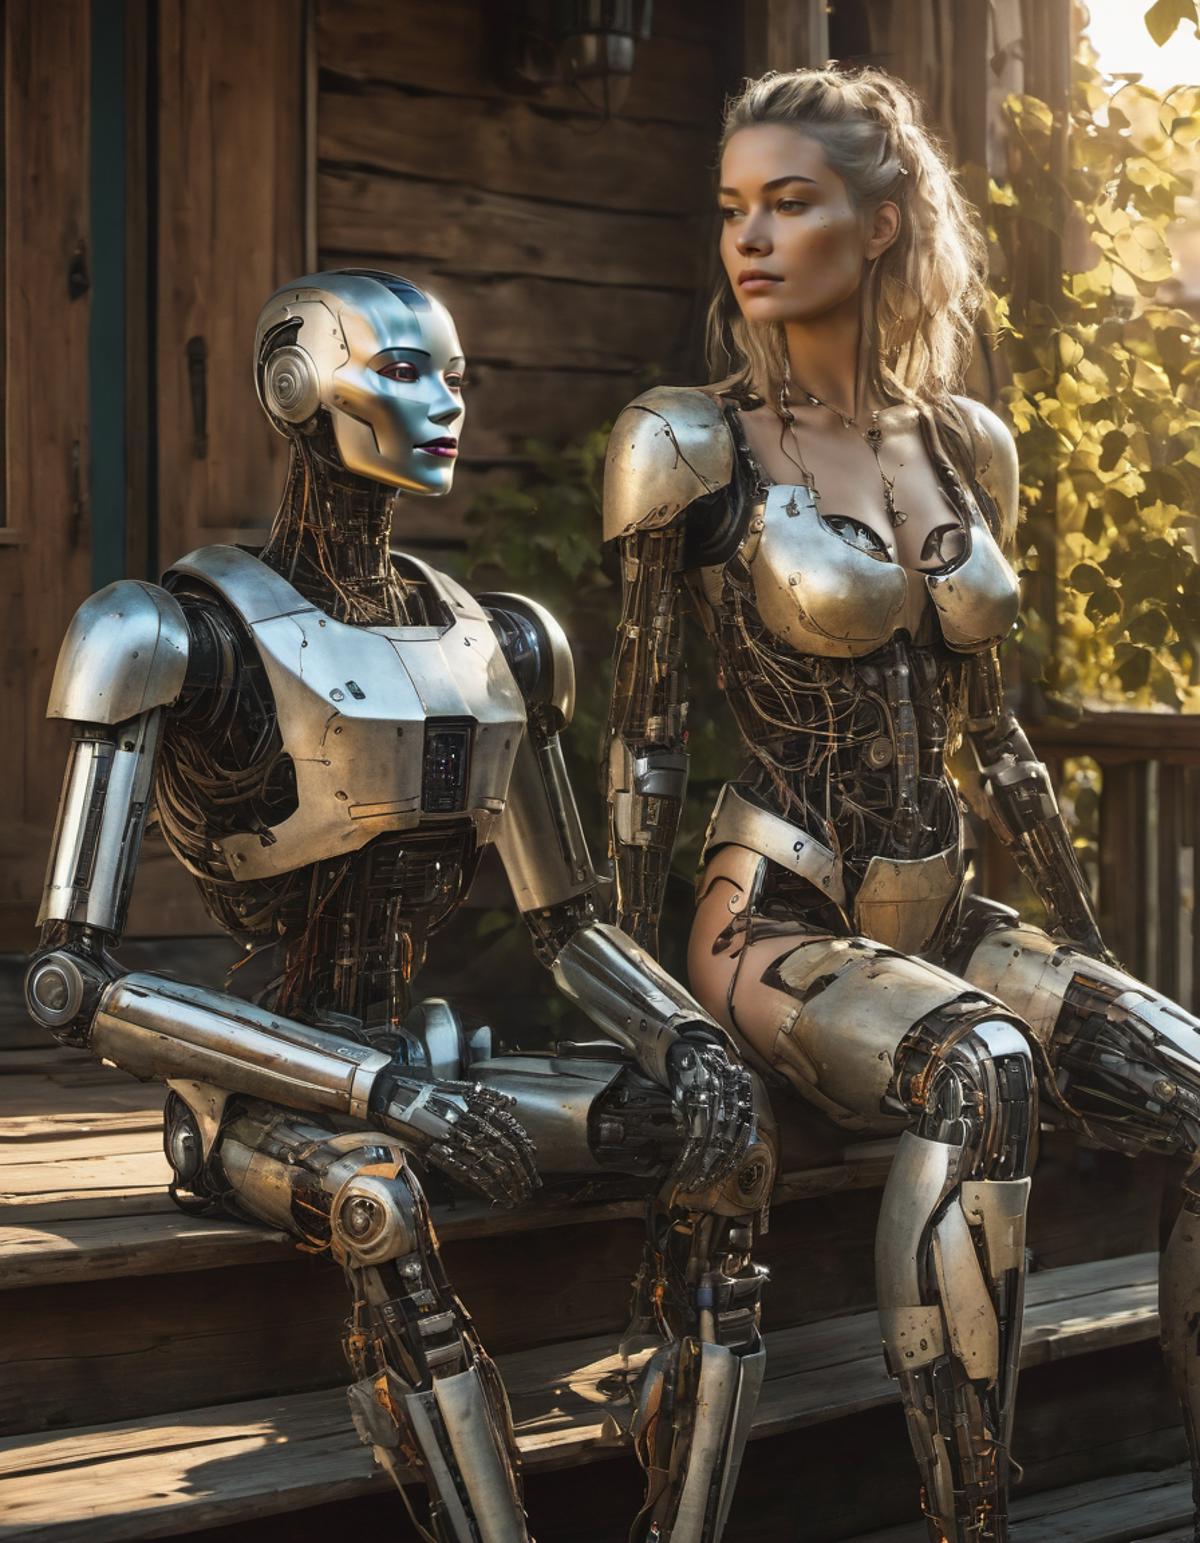 A robotic woman and a cyborg woman sitting together.